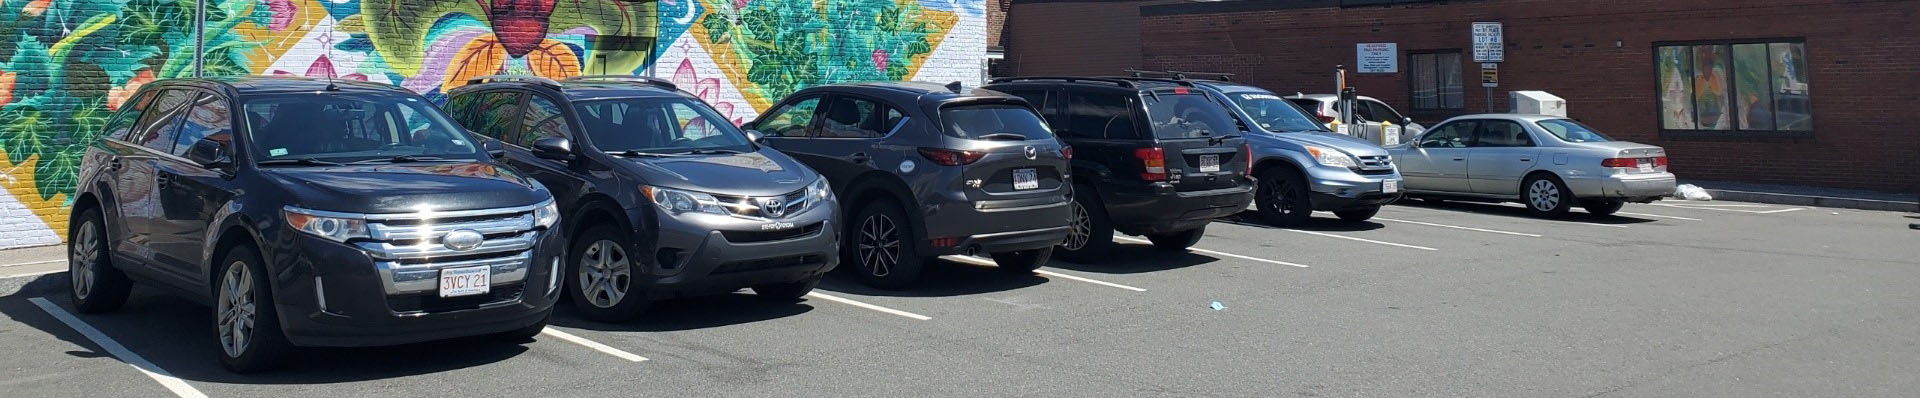 Row of parked cars in a lot with a colorful mural behind